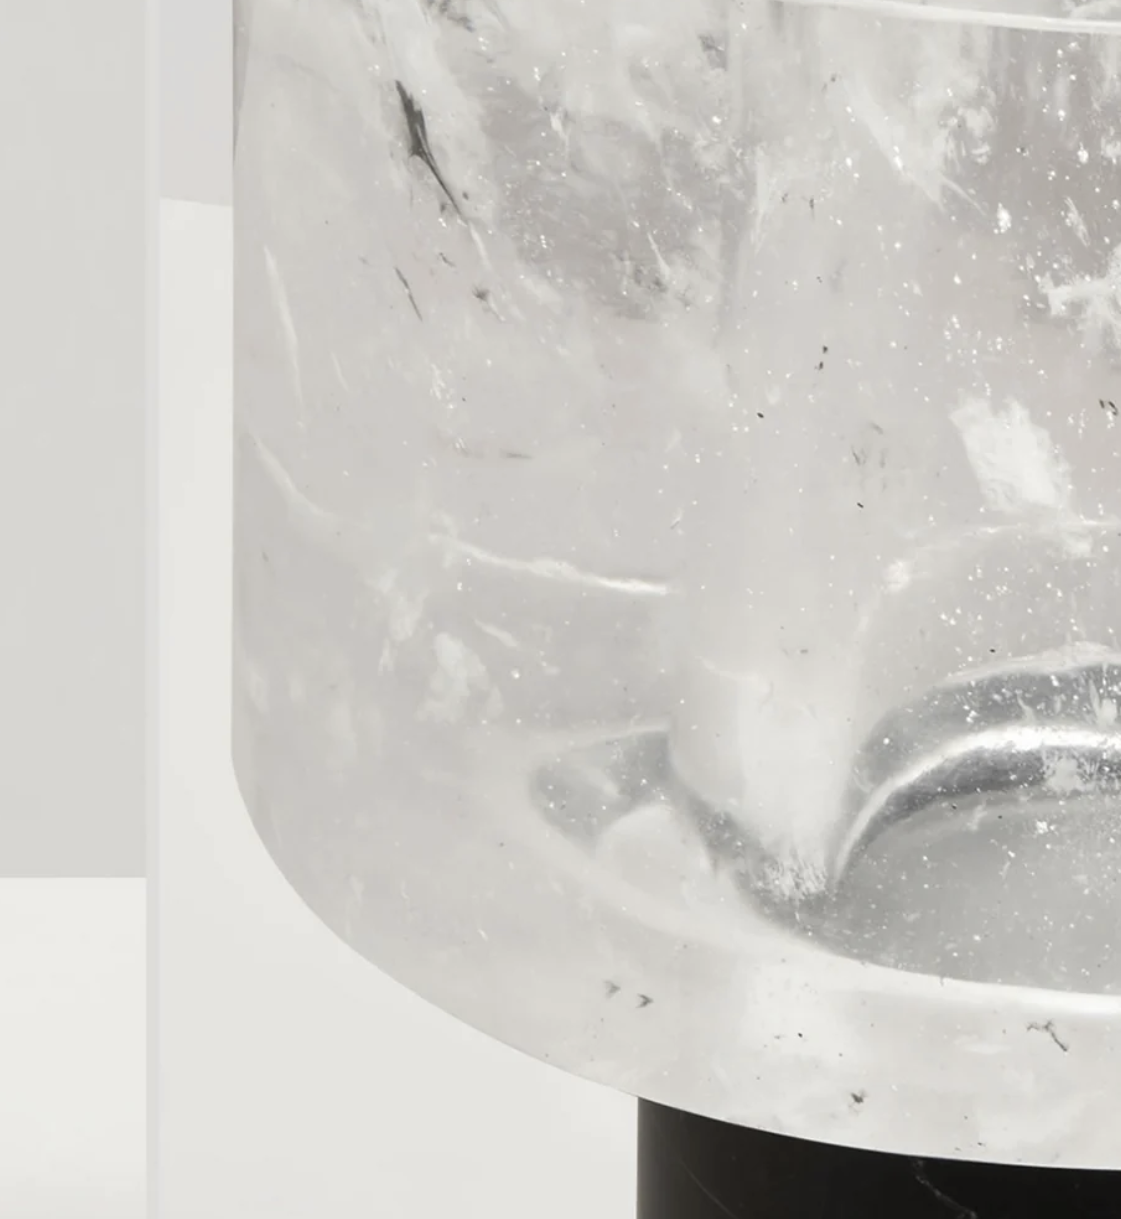 MINERAL TABLE LAMP by Gilles Caffier - $7,500.00